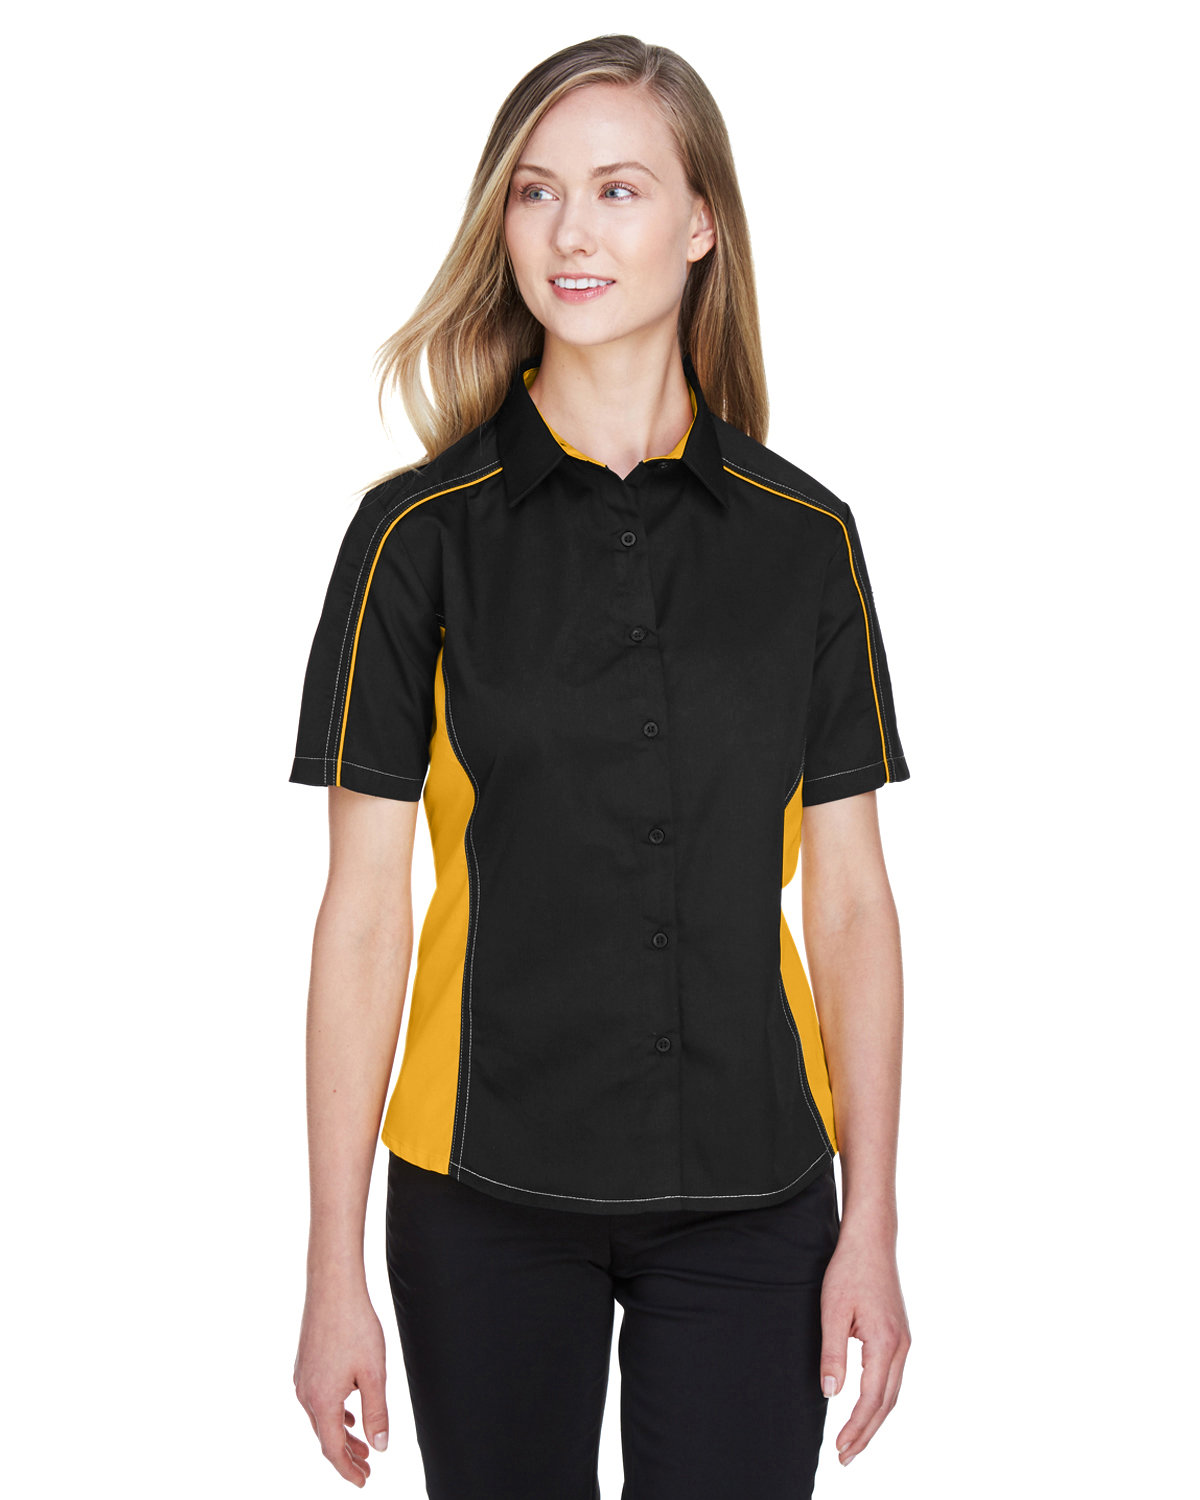 North End Ladies' Fuse Colorblock Twill Shirt BLK/ CMPS GOLD 